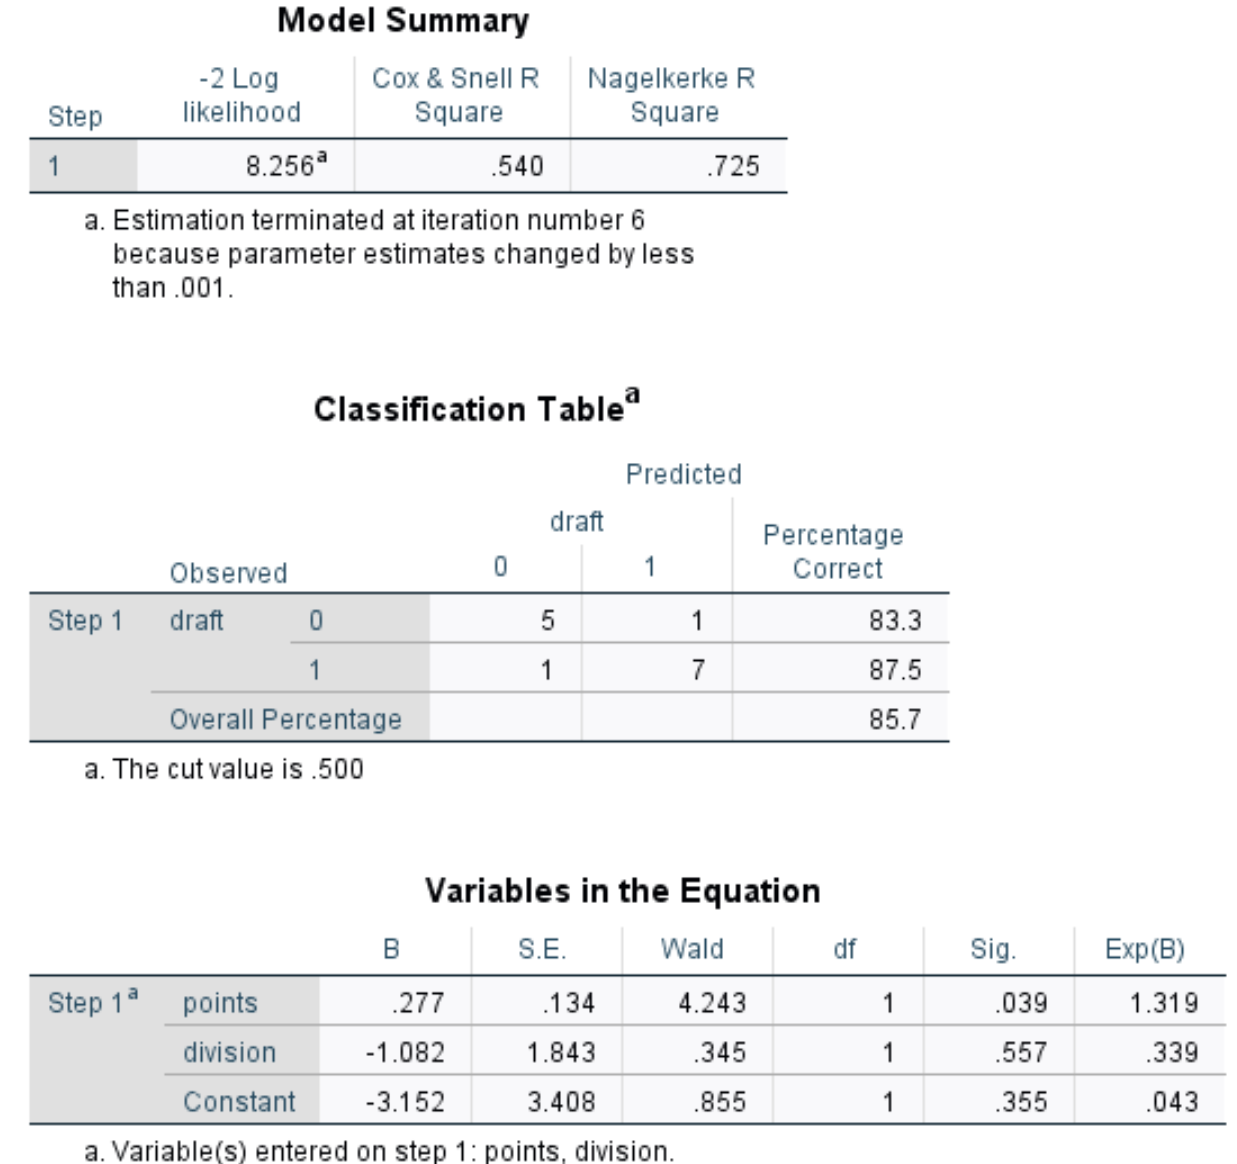 Output of logistic regression in SPSS